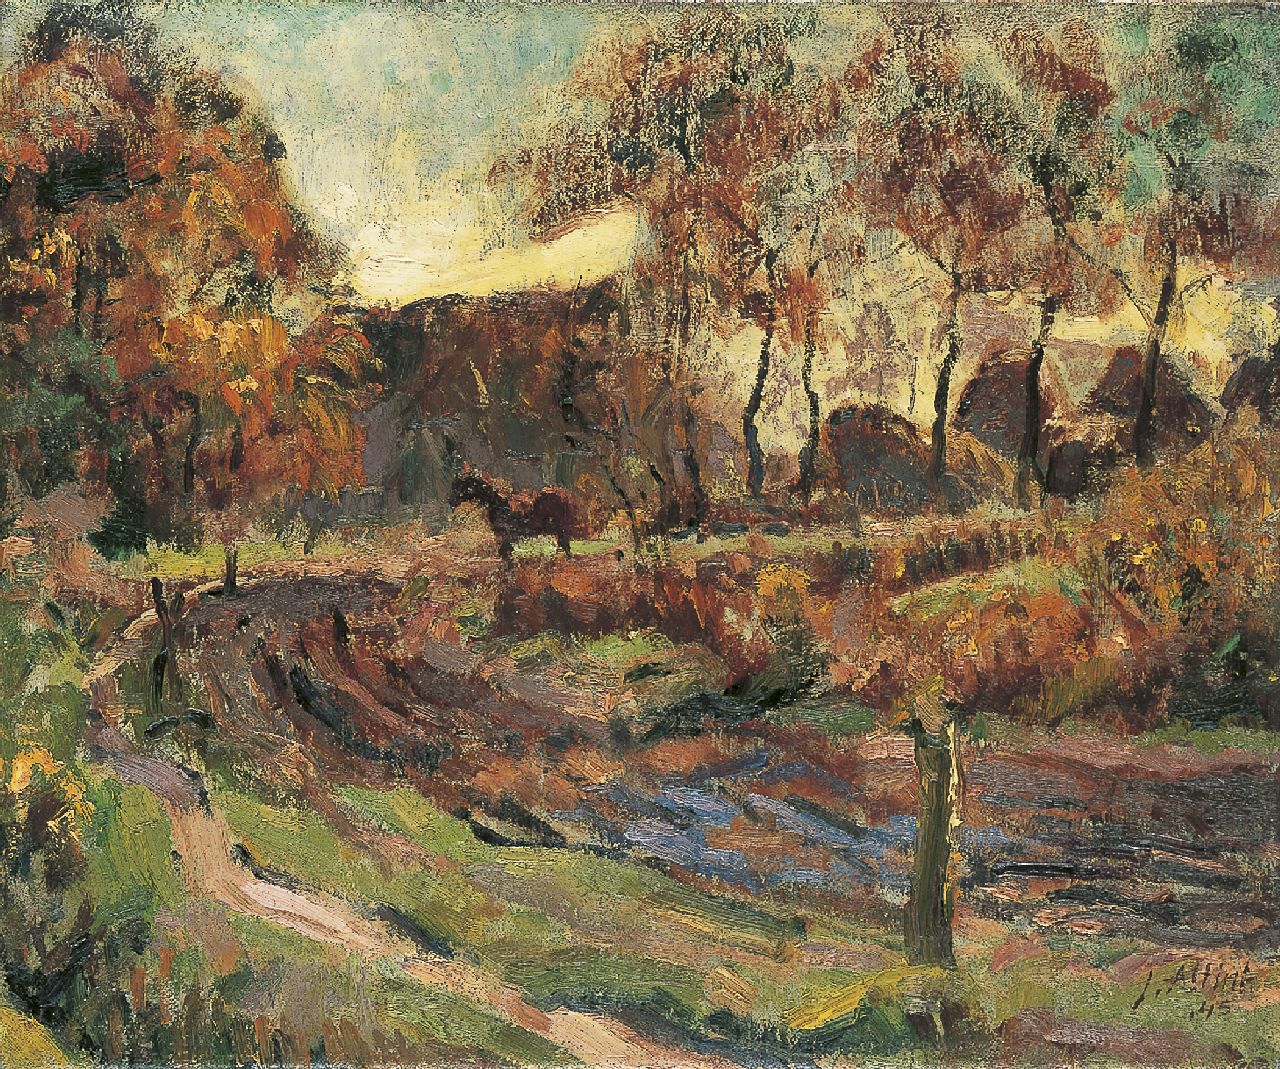 Altink J.  | Jan Altink, A landscape with a horse and farm, oil on canvas 50.2 x 60.7 cm, signed l.r. and dated '45